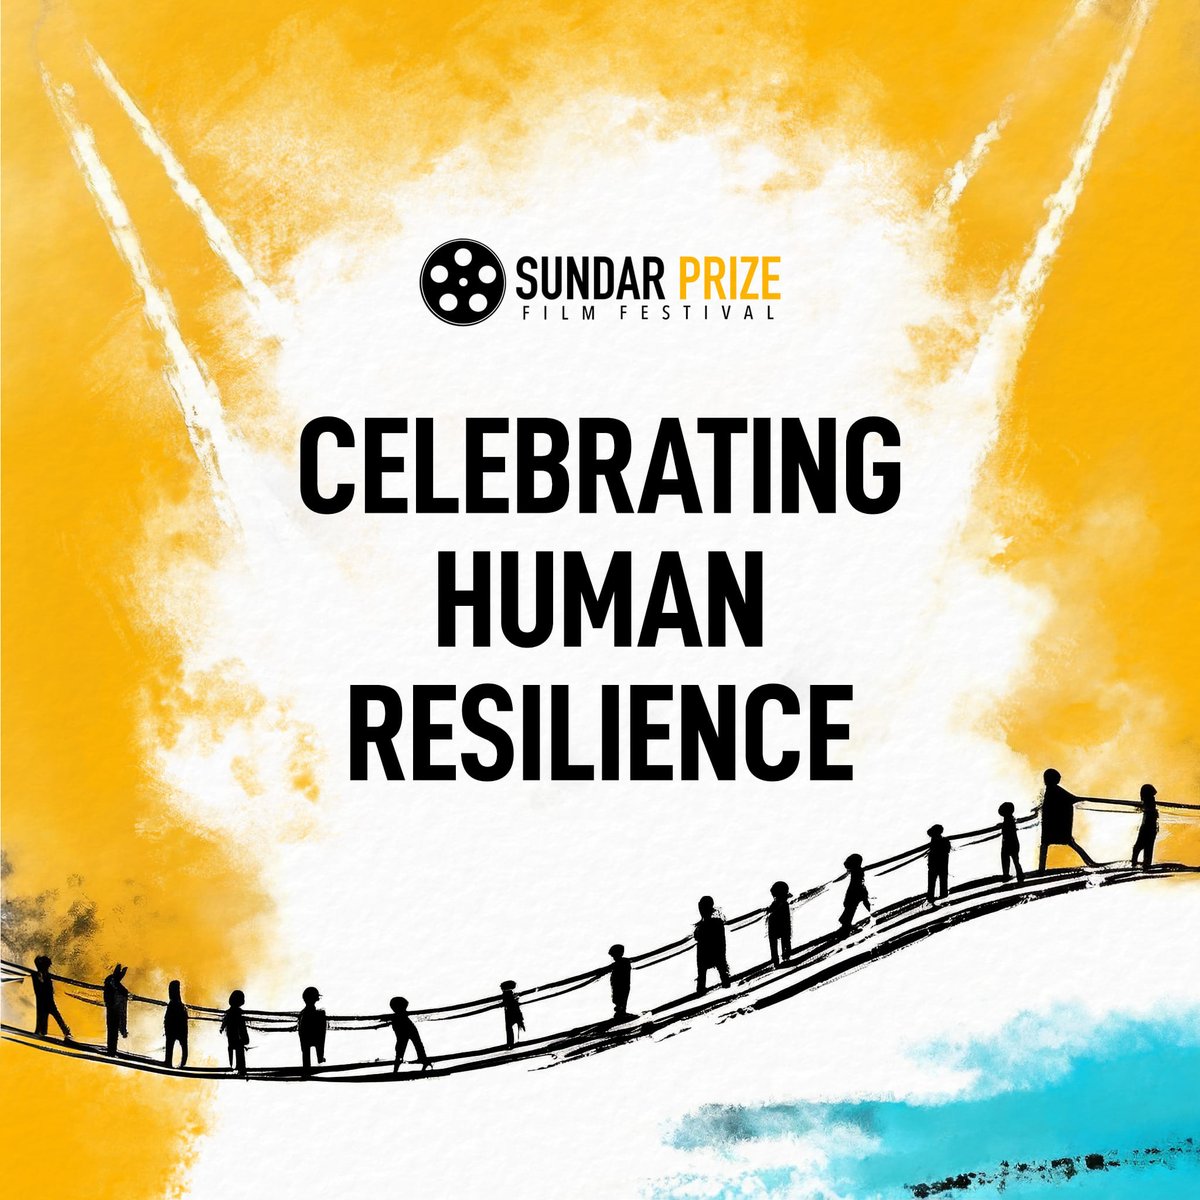 Get ready for the inaugural year of the Sundar Prize Film Festival 2024! The theme this year will be 'Celebrating Human Resilience'. Taking place June 15 and 16 at Surrey City Hall, this one is not to be missed! Follow @SundarPrize for more updates ✨